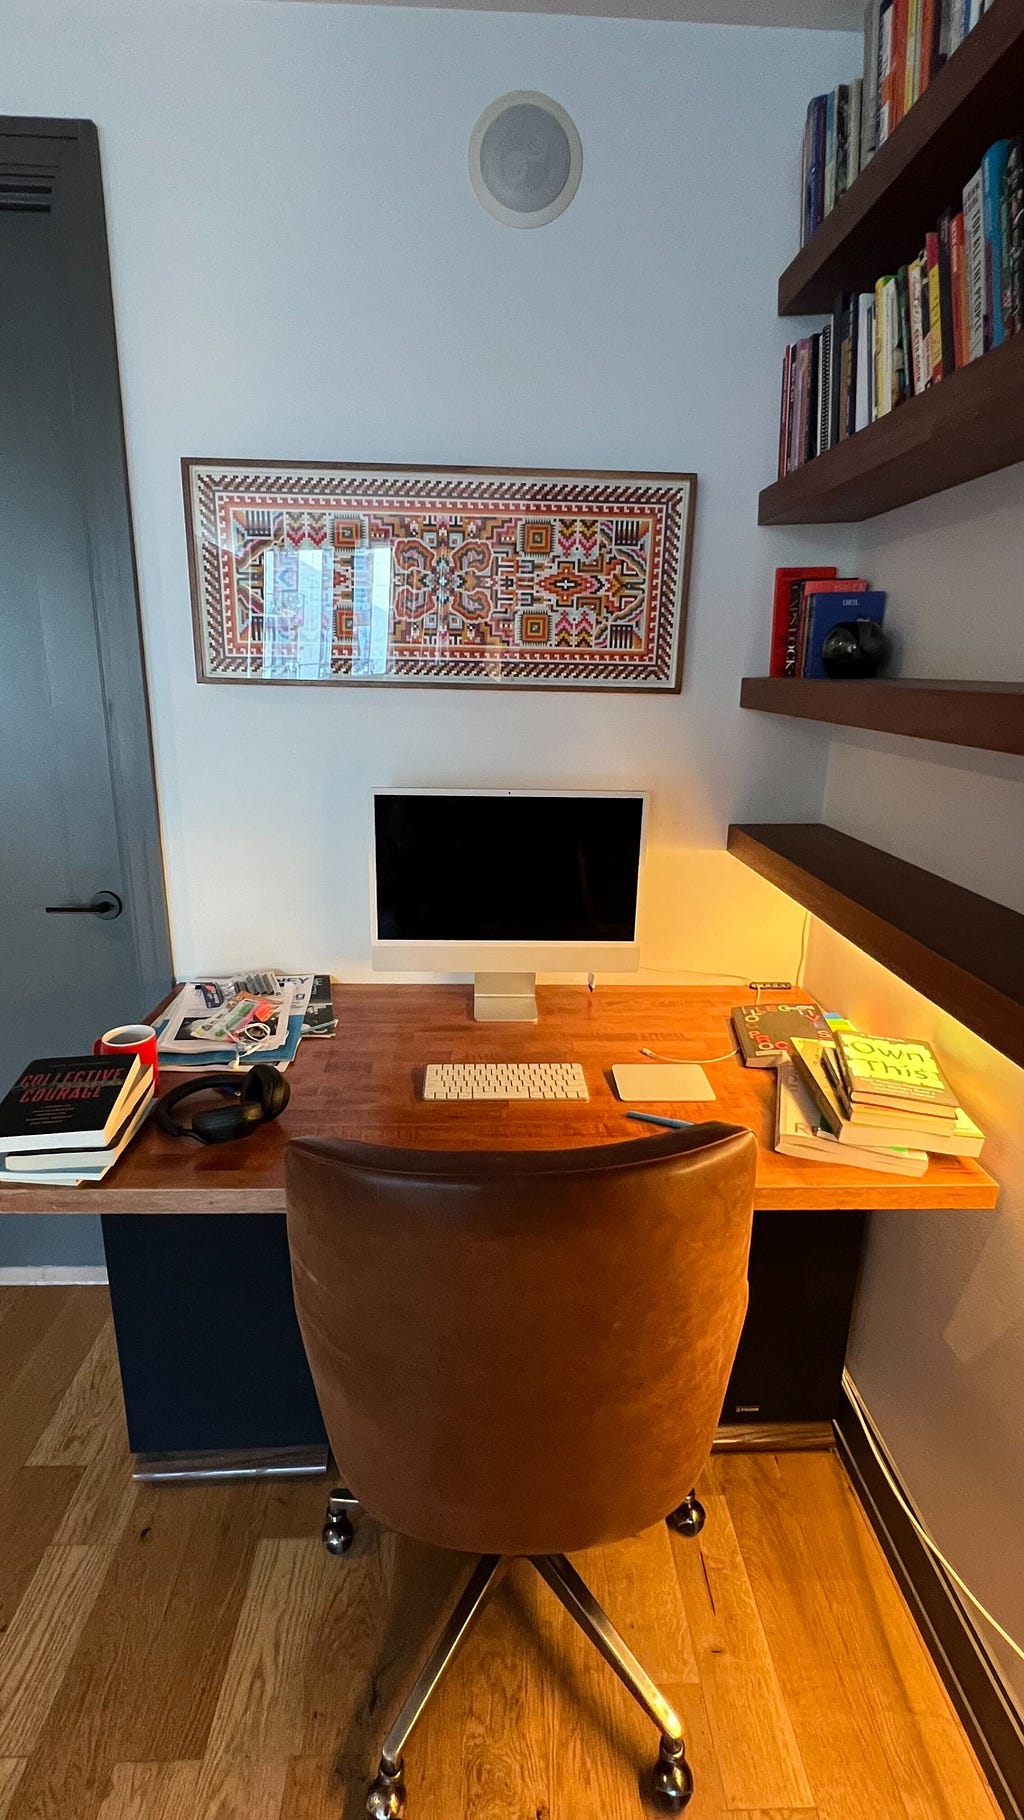 Photo of Austin’s desk. There is a small wooden desktop with an Apple monitor and keyboard, with short stacks of books on both sides of the table and a pair of over ear headphones. On the wall above the desk there is an intricate geometric illustration in various colors.